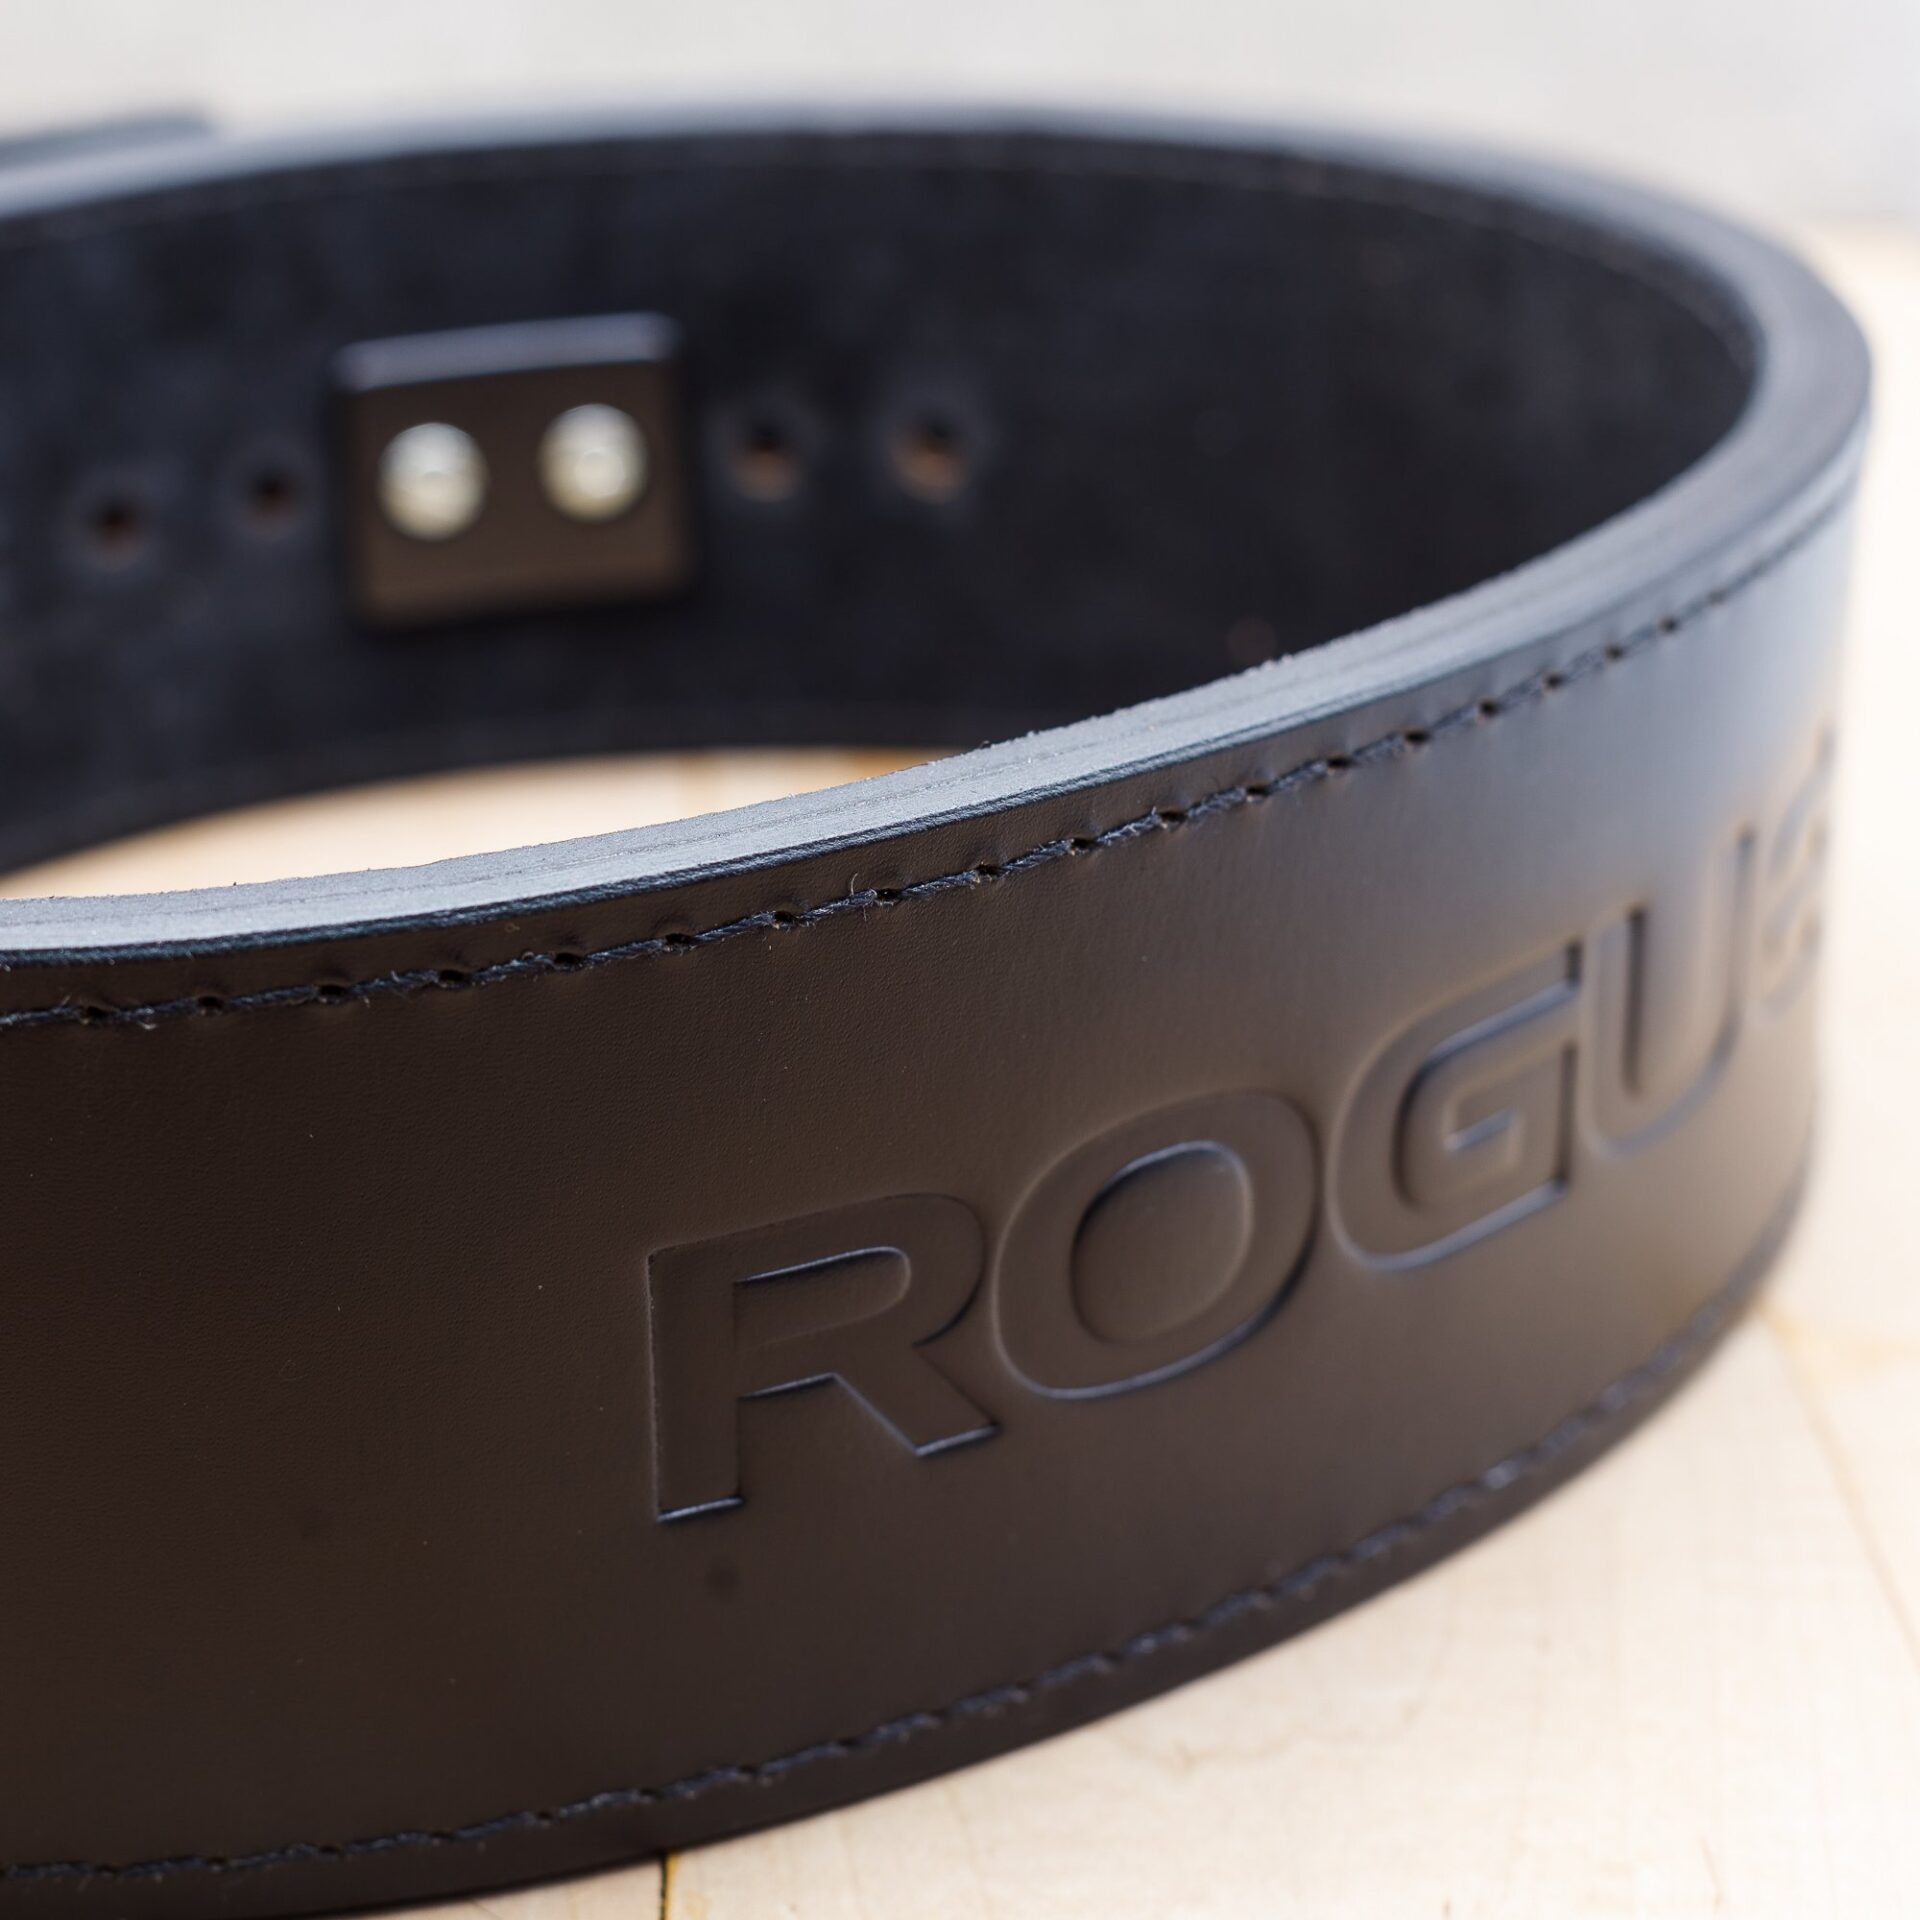 Rogue Black 13mm 4” Powerlifting Leather Lever Belt – IPF-Approved